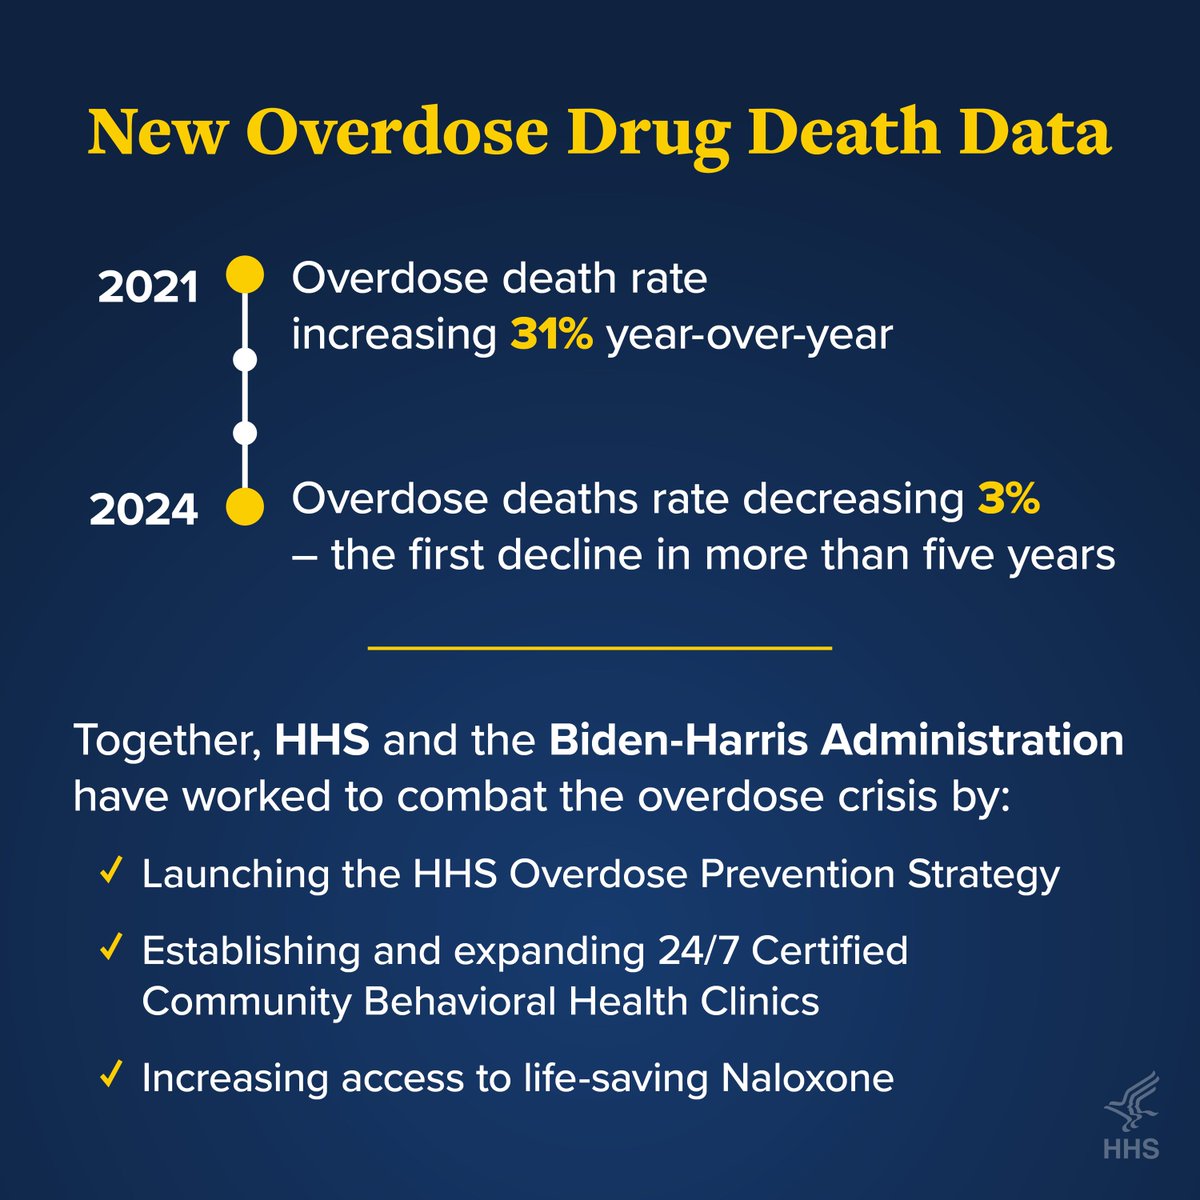 When @POTUS took office in 2021, the overdose death rate was increasing 31% year-over-year. Yesterday, we announced that drug overdose deaths fell 3% over the past year—the first decline in more than five years. This new data confirms that our efforts are driving results.